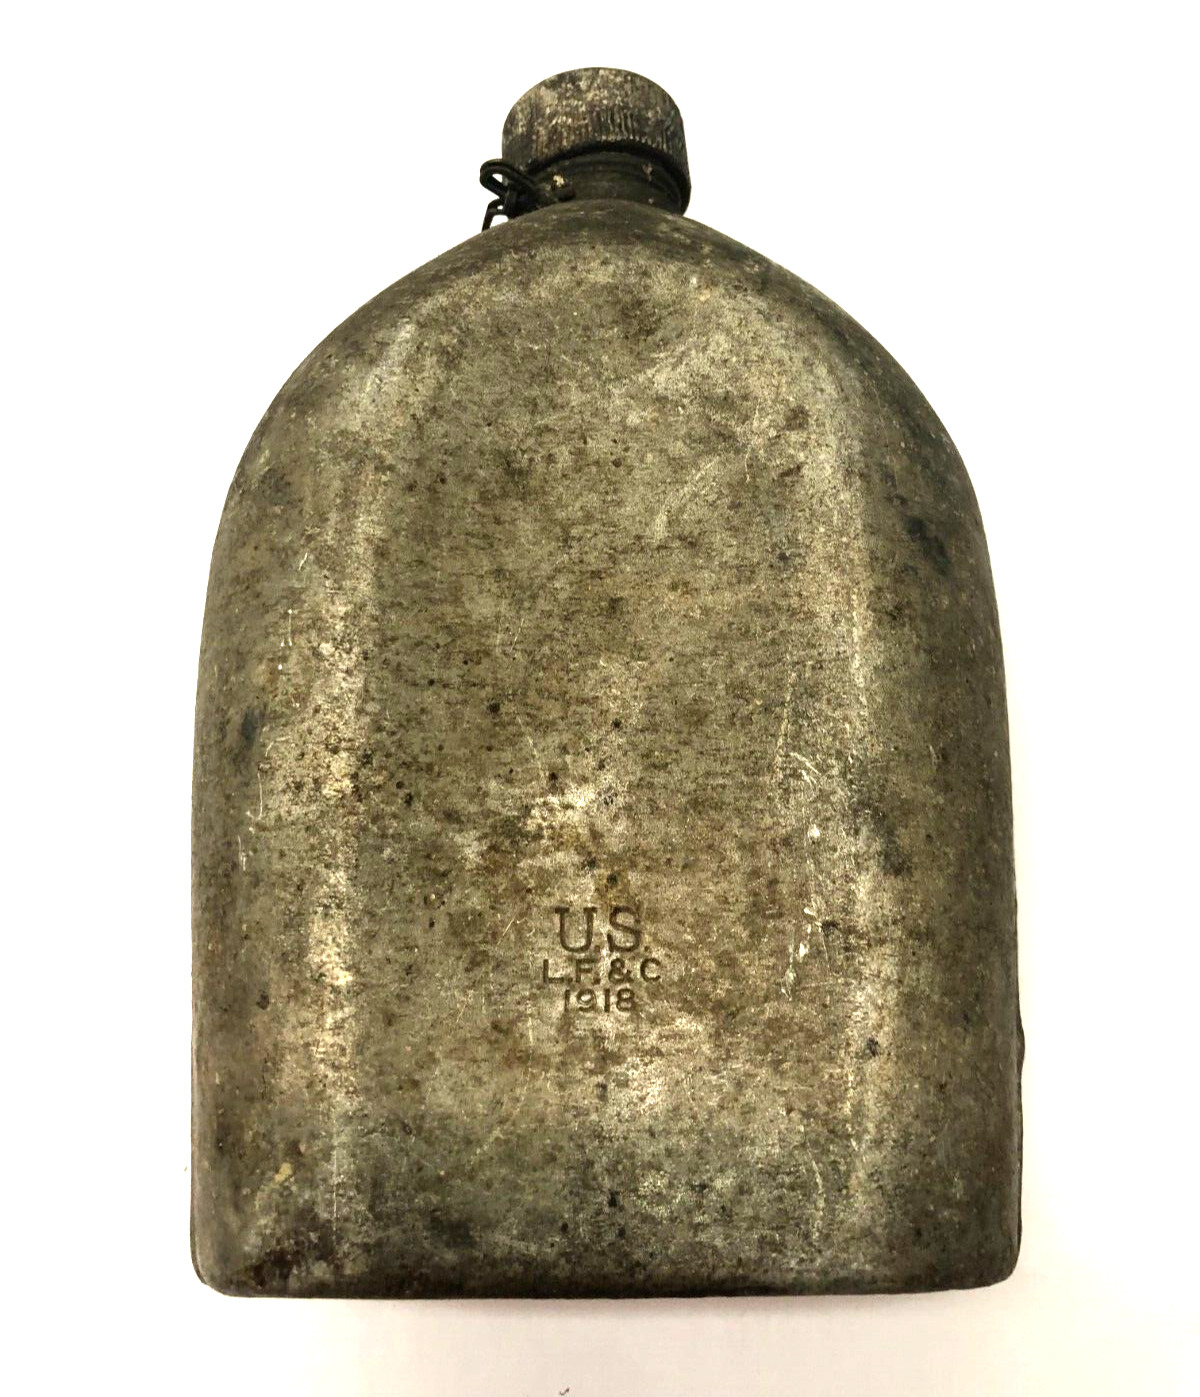 WWI Canteen LF & C 1918 Antique